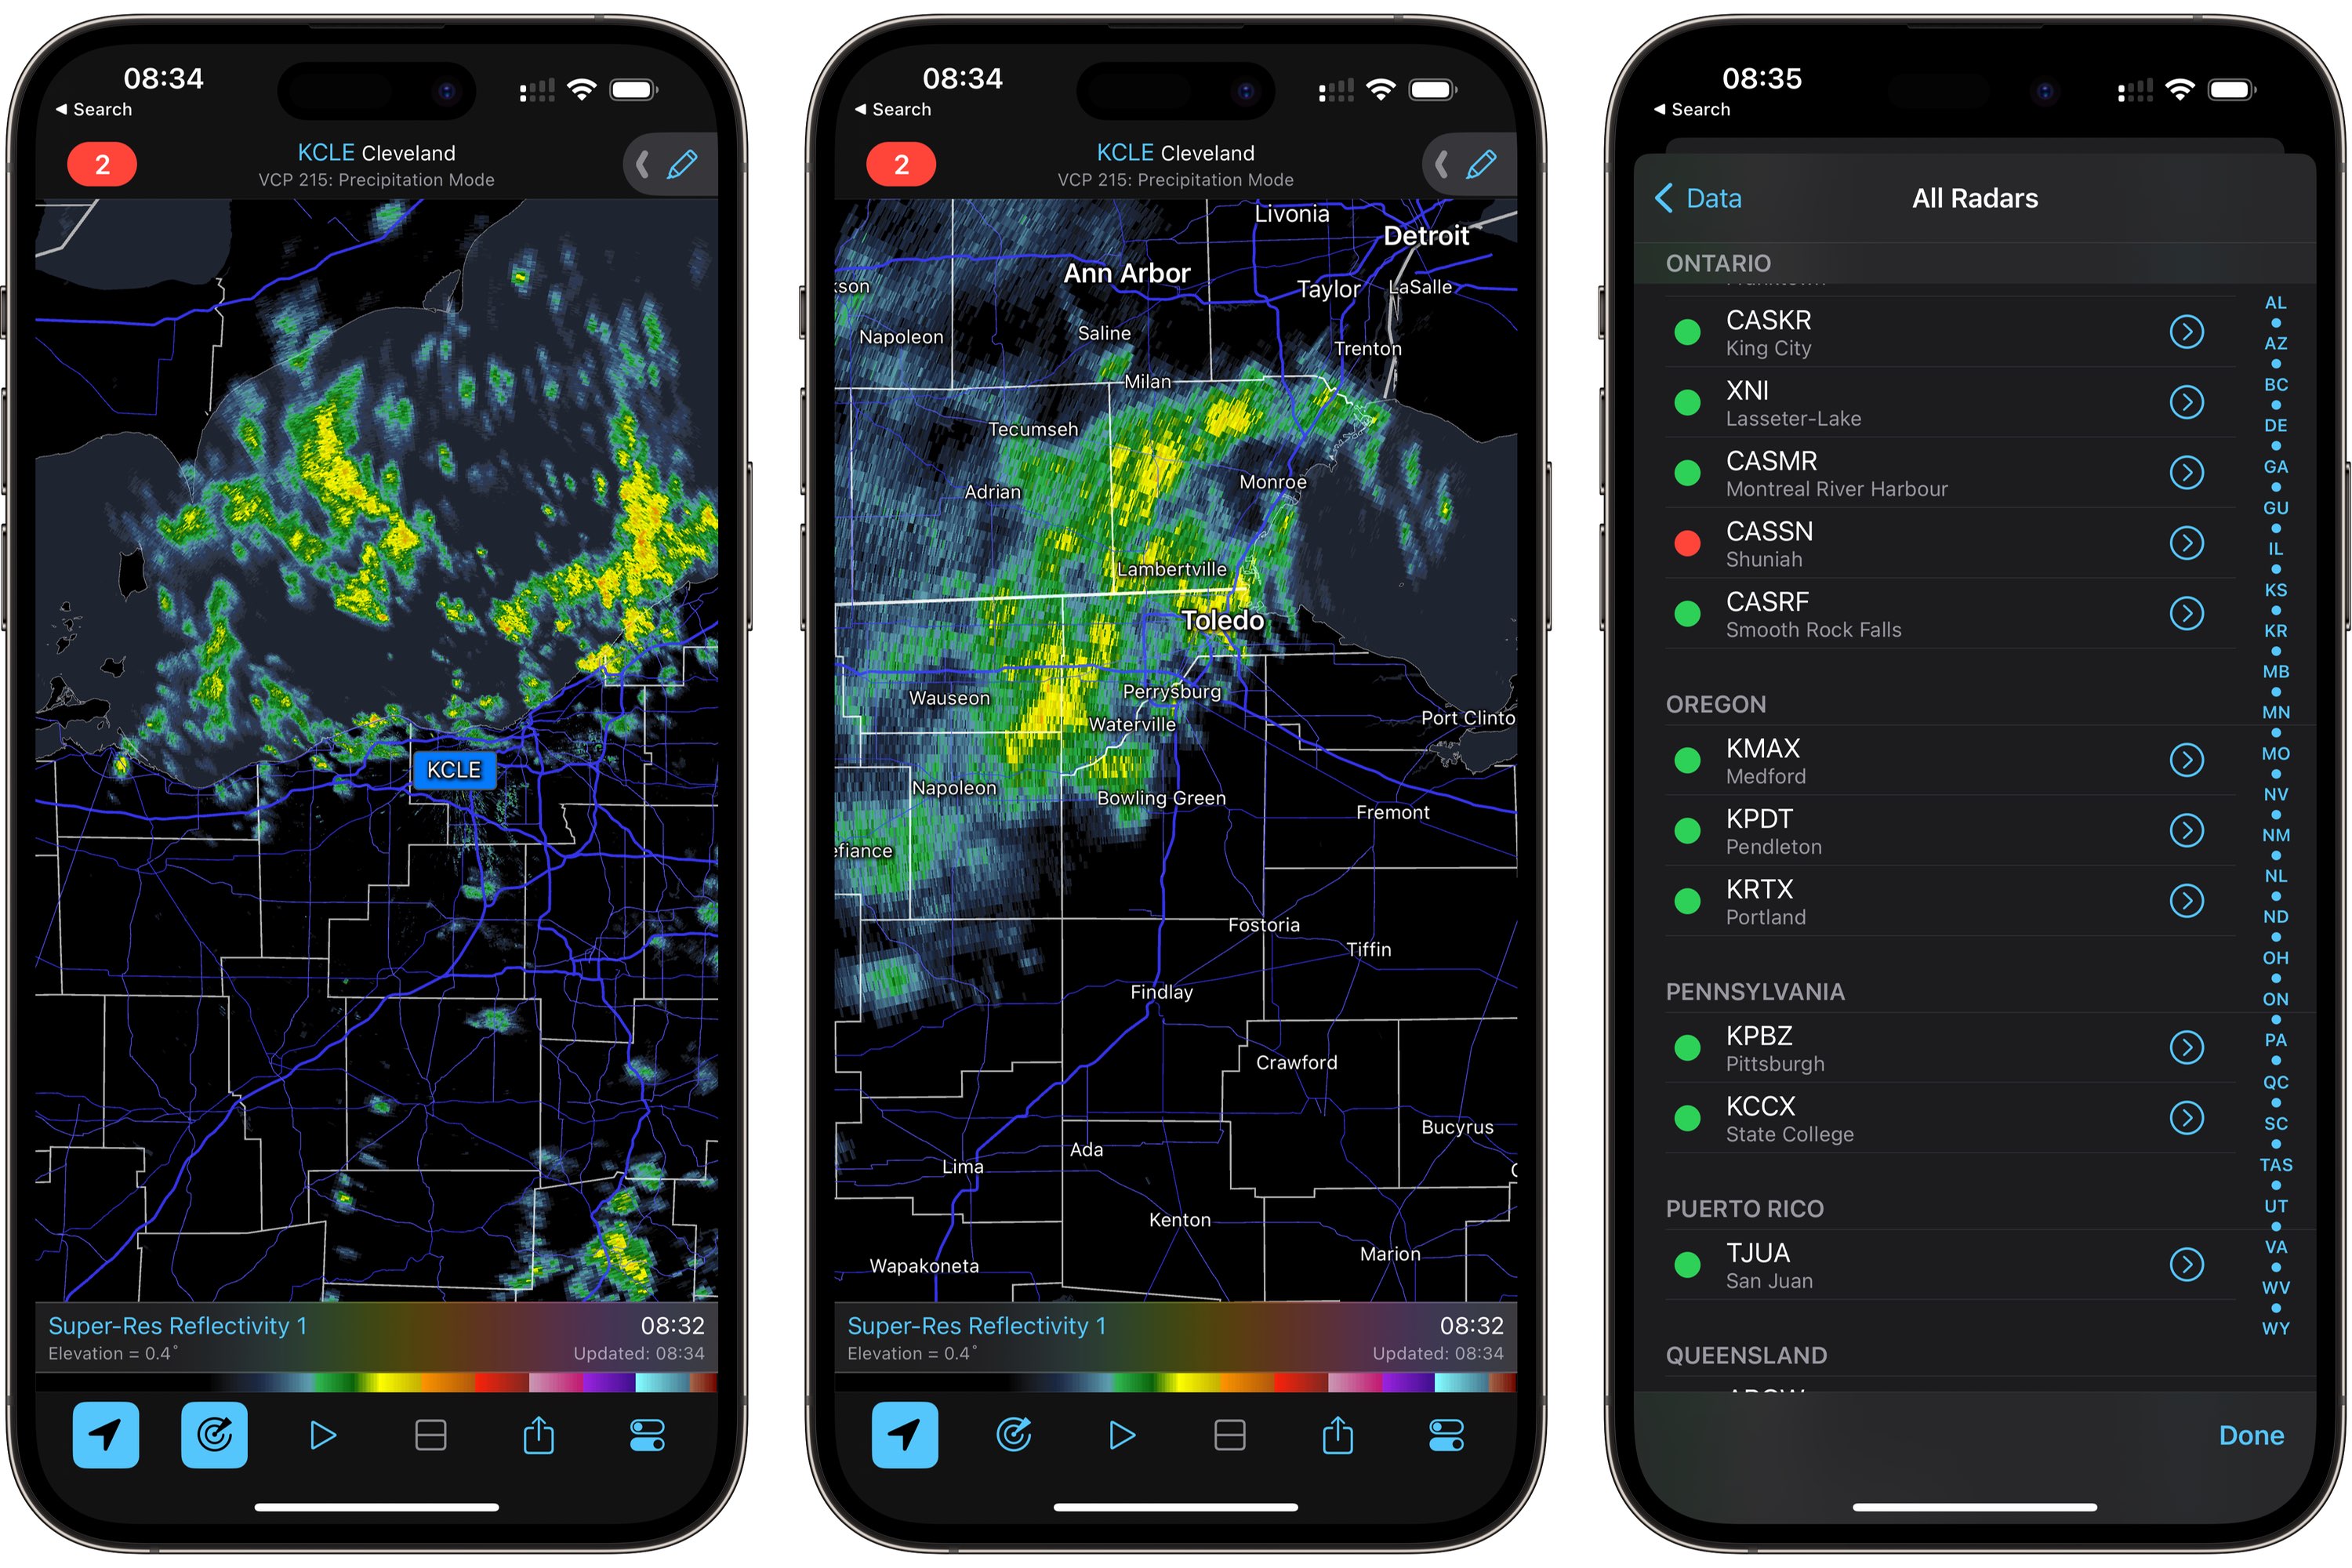 does radarscope offer a forecast function